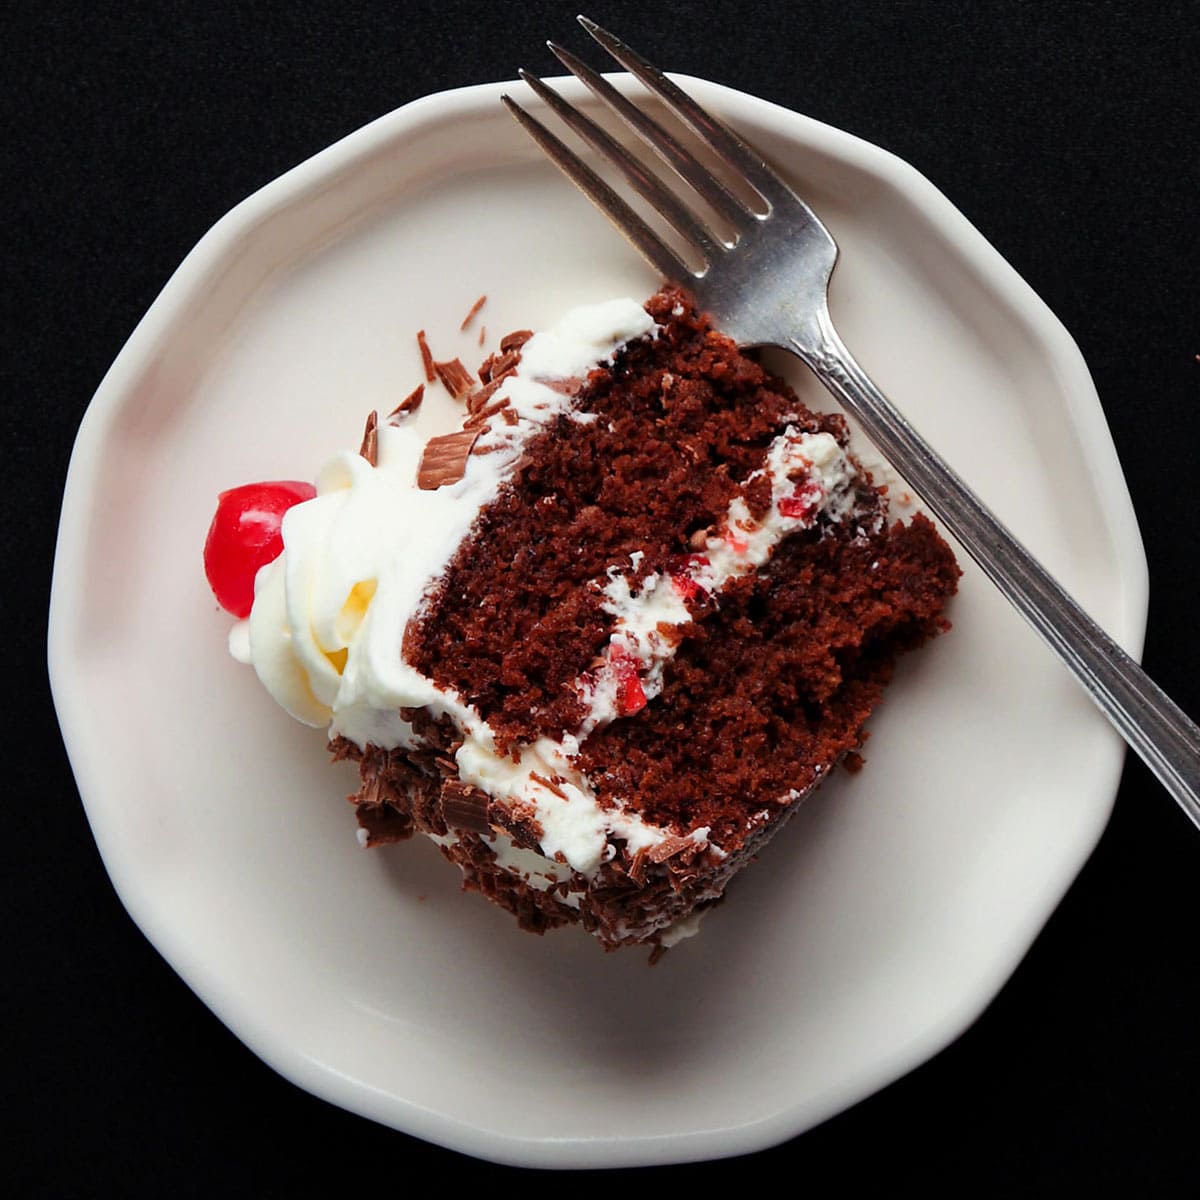 overhead shot of a slice of black forest cake on its side on a white dessert plate with a silver fork